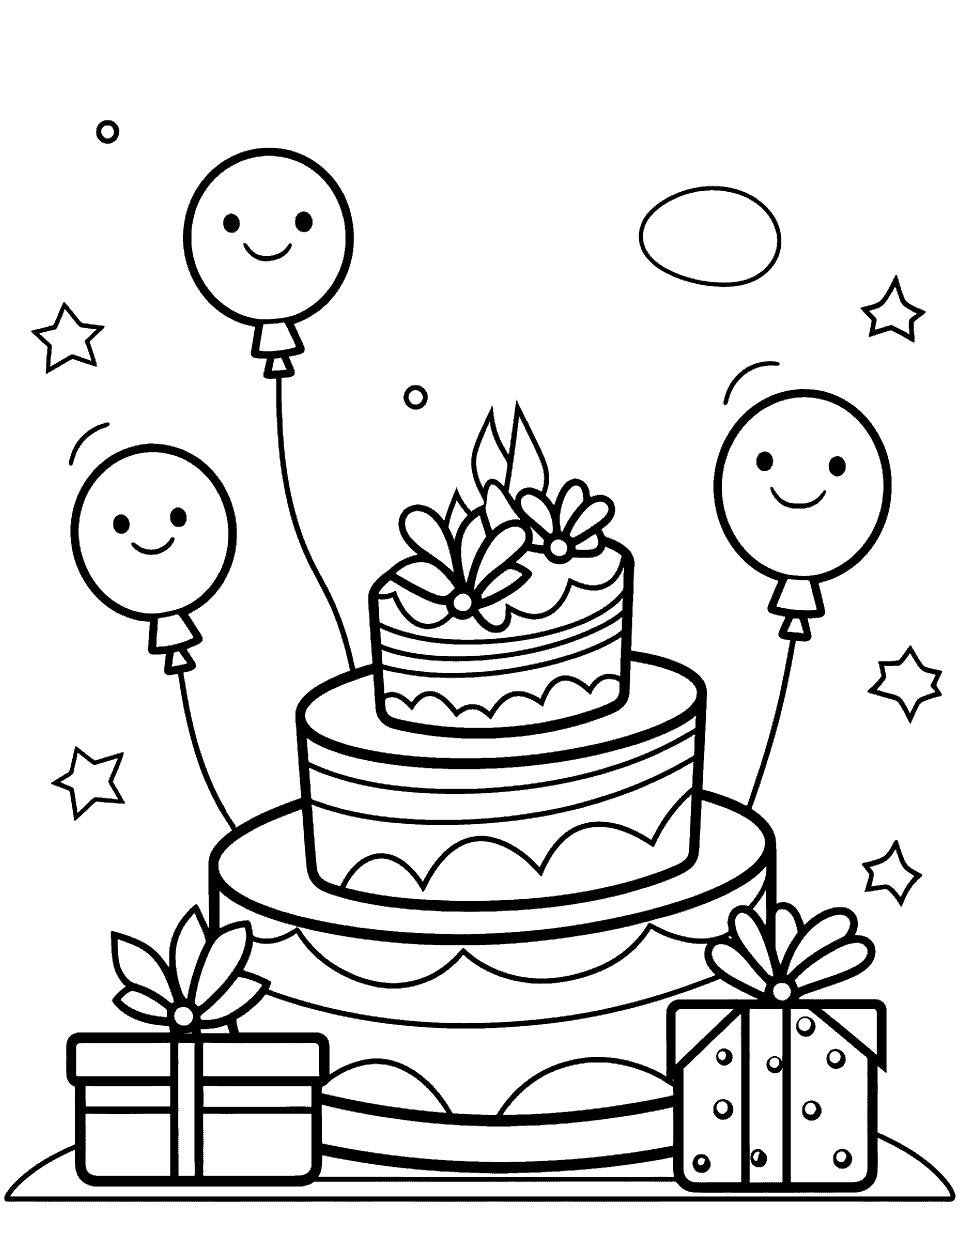 Happy Birthday Coloring Page - A birthday cake with candles surrounded by gifts.